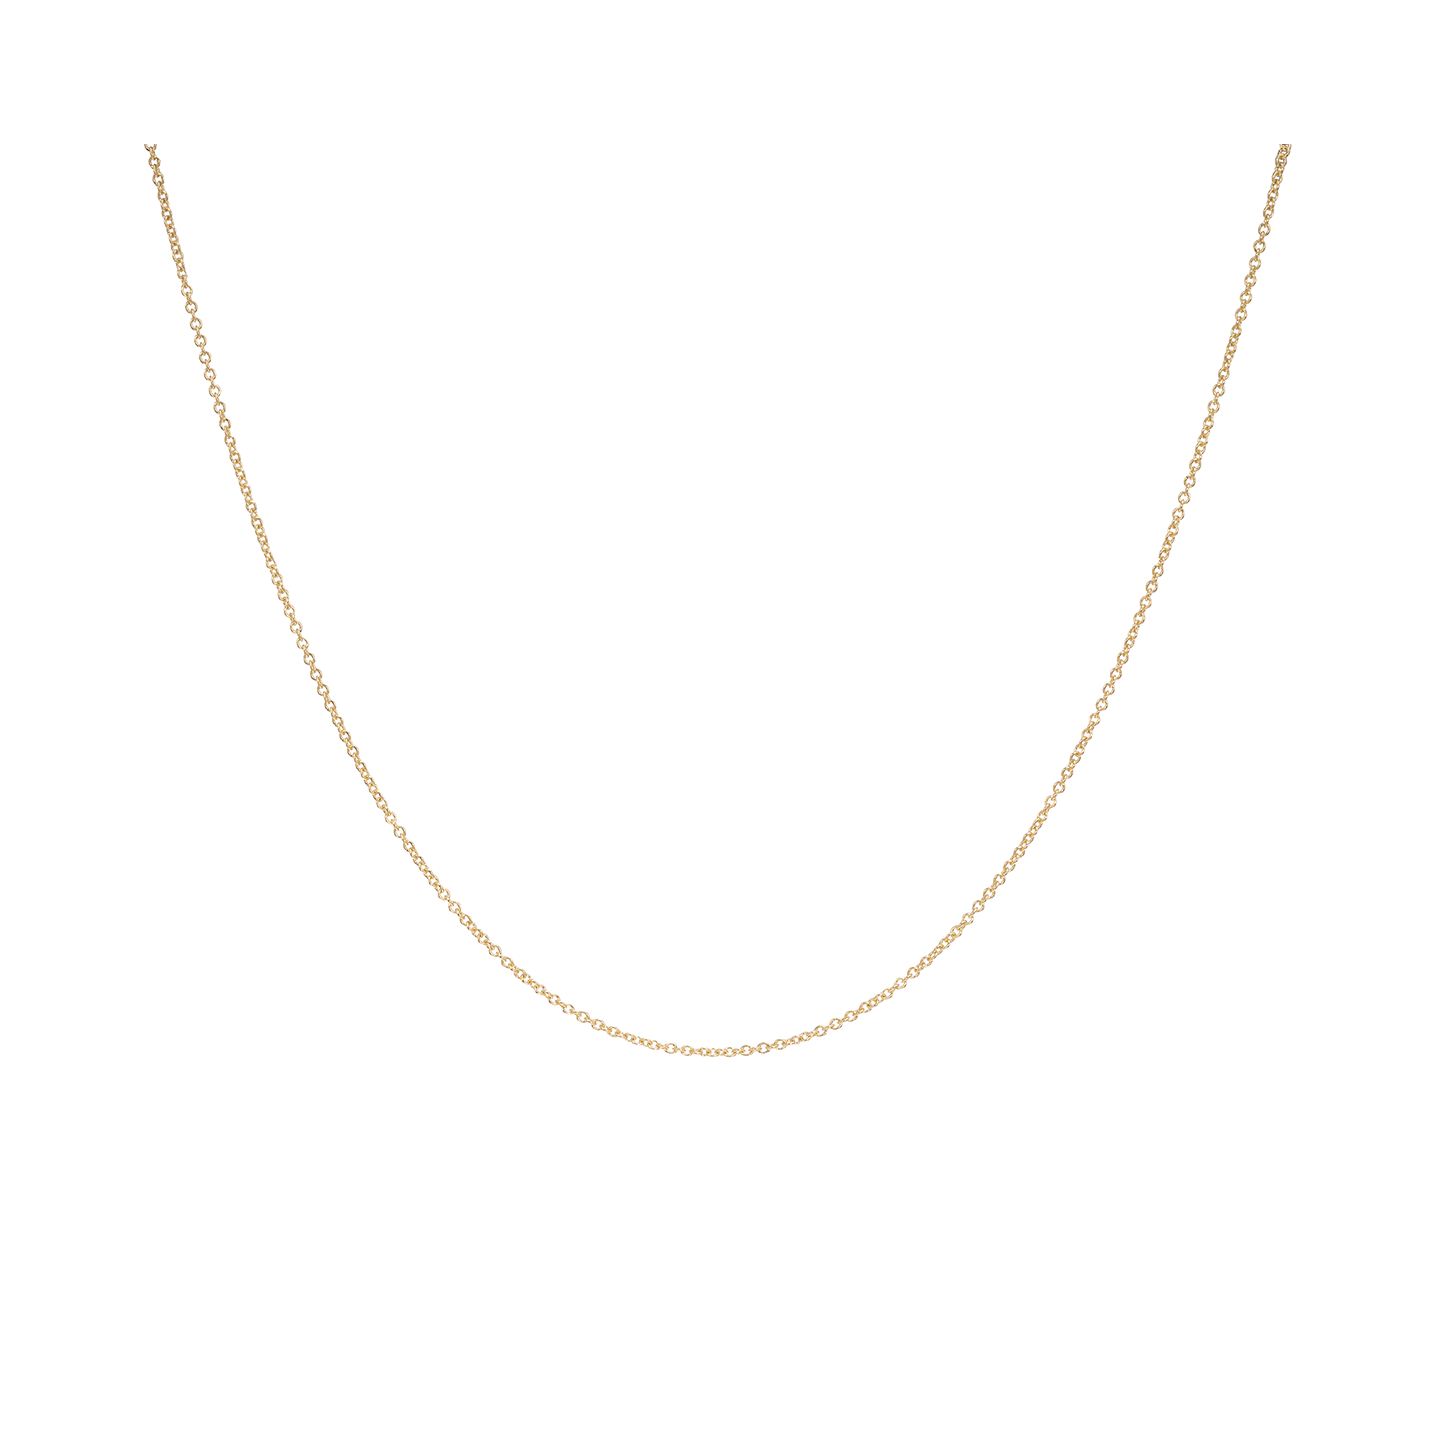 Caroline Ellen Thin Cable Chain with Lobster Claw Clasp